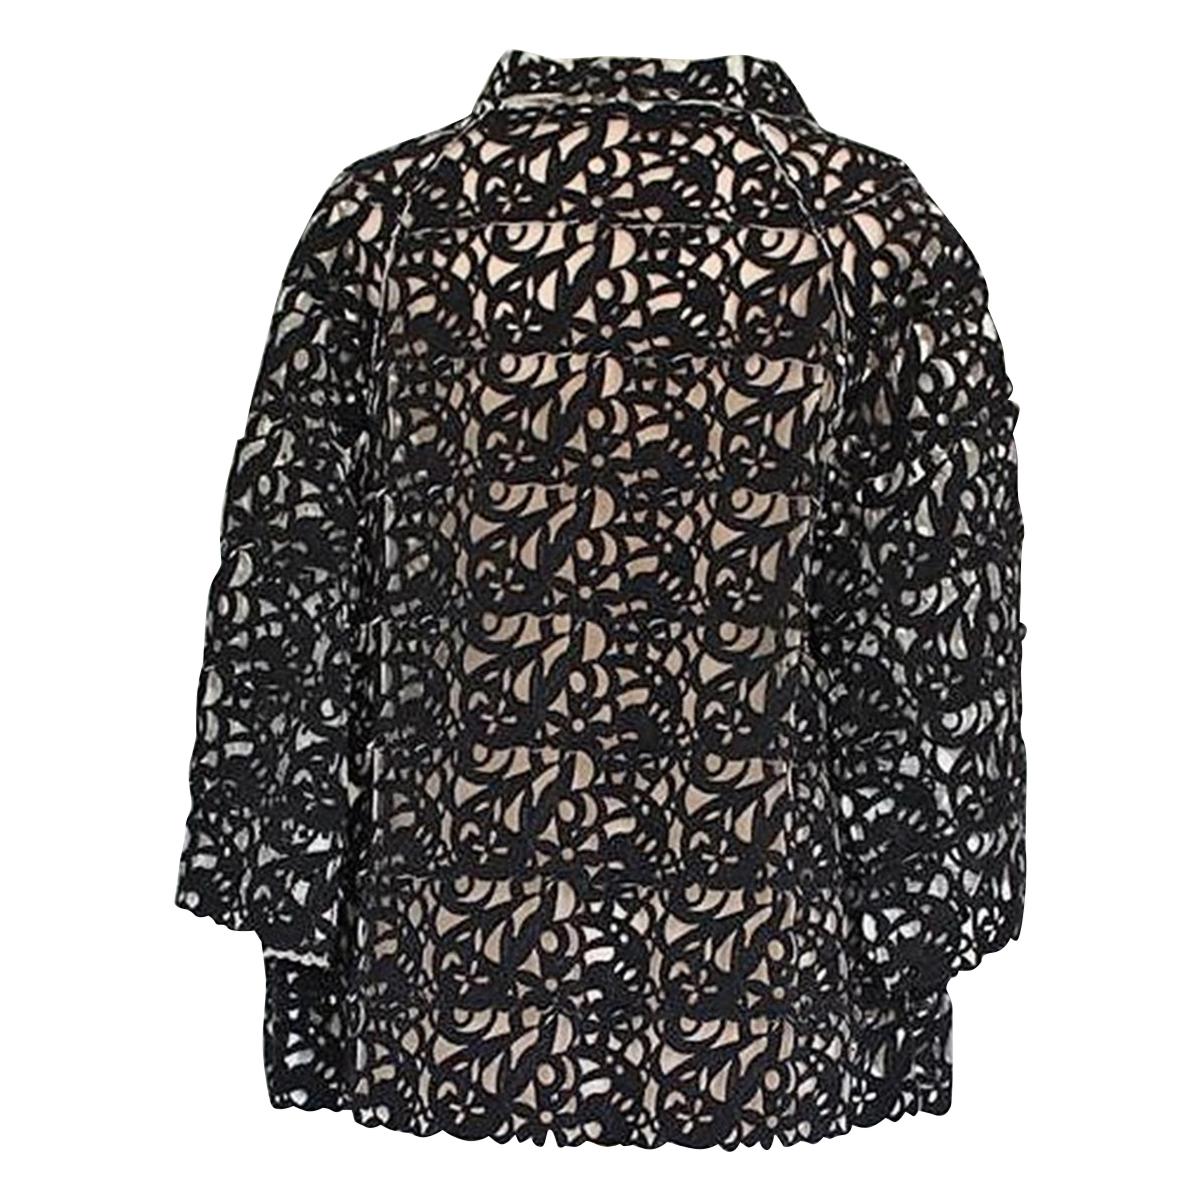 Very chic overcoat by Gianluca Capannolo
Beautiful cut & fit
Polyamide (80%) and elasthane (20%)
Black and white
Double face
Floral pattern
3/4 Sleeve
Total length cm 64 (25.1 inches)
Shoulder cm 39 (15.35 inches)
Worldwide express shipping included